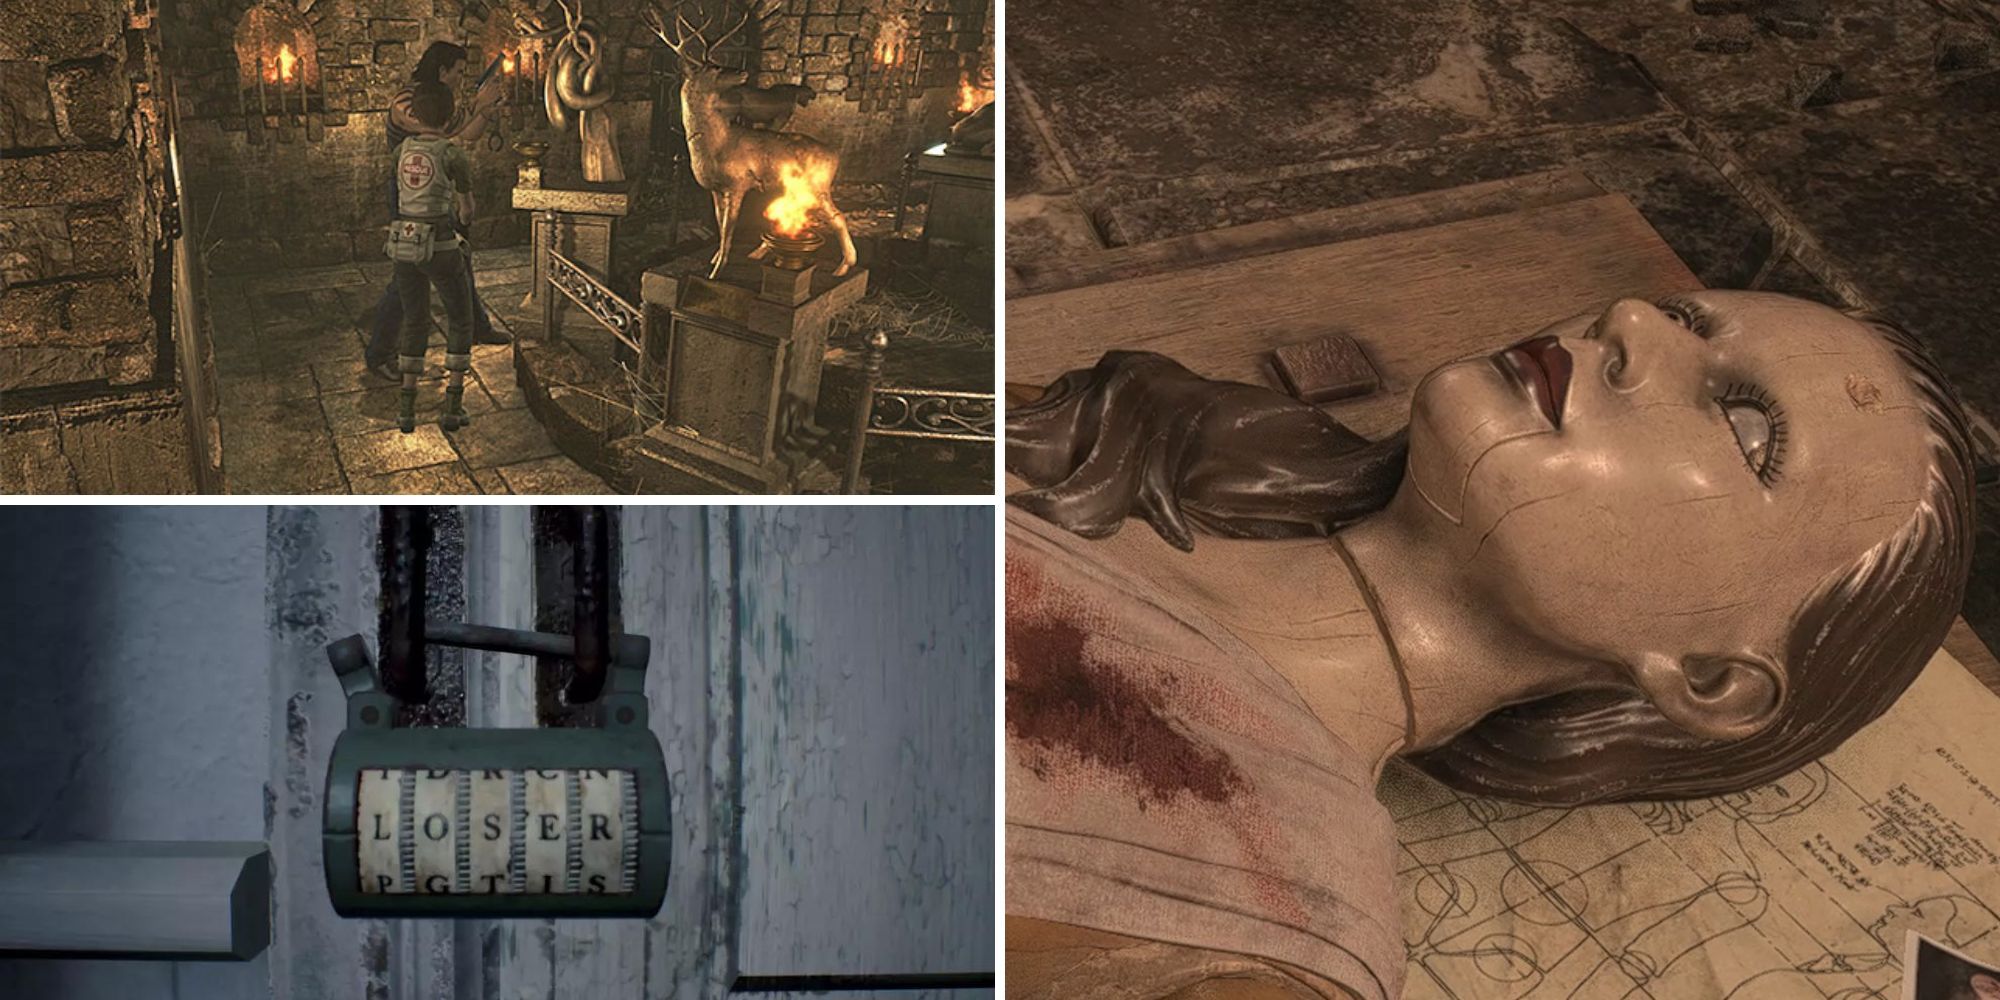 The 10 Hardest Puzzles In The Resident Evil Franchise, Ranked